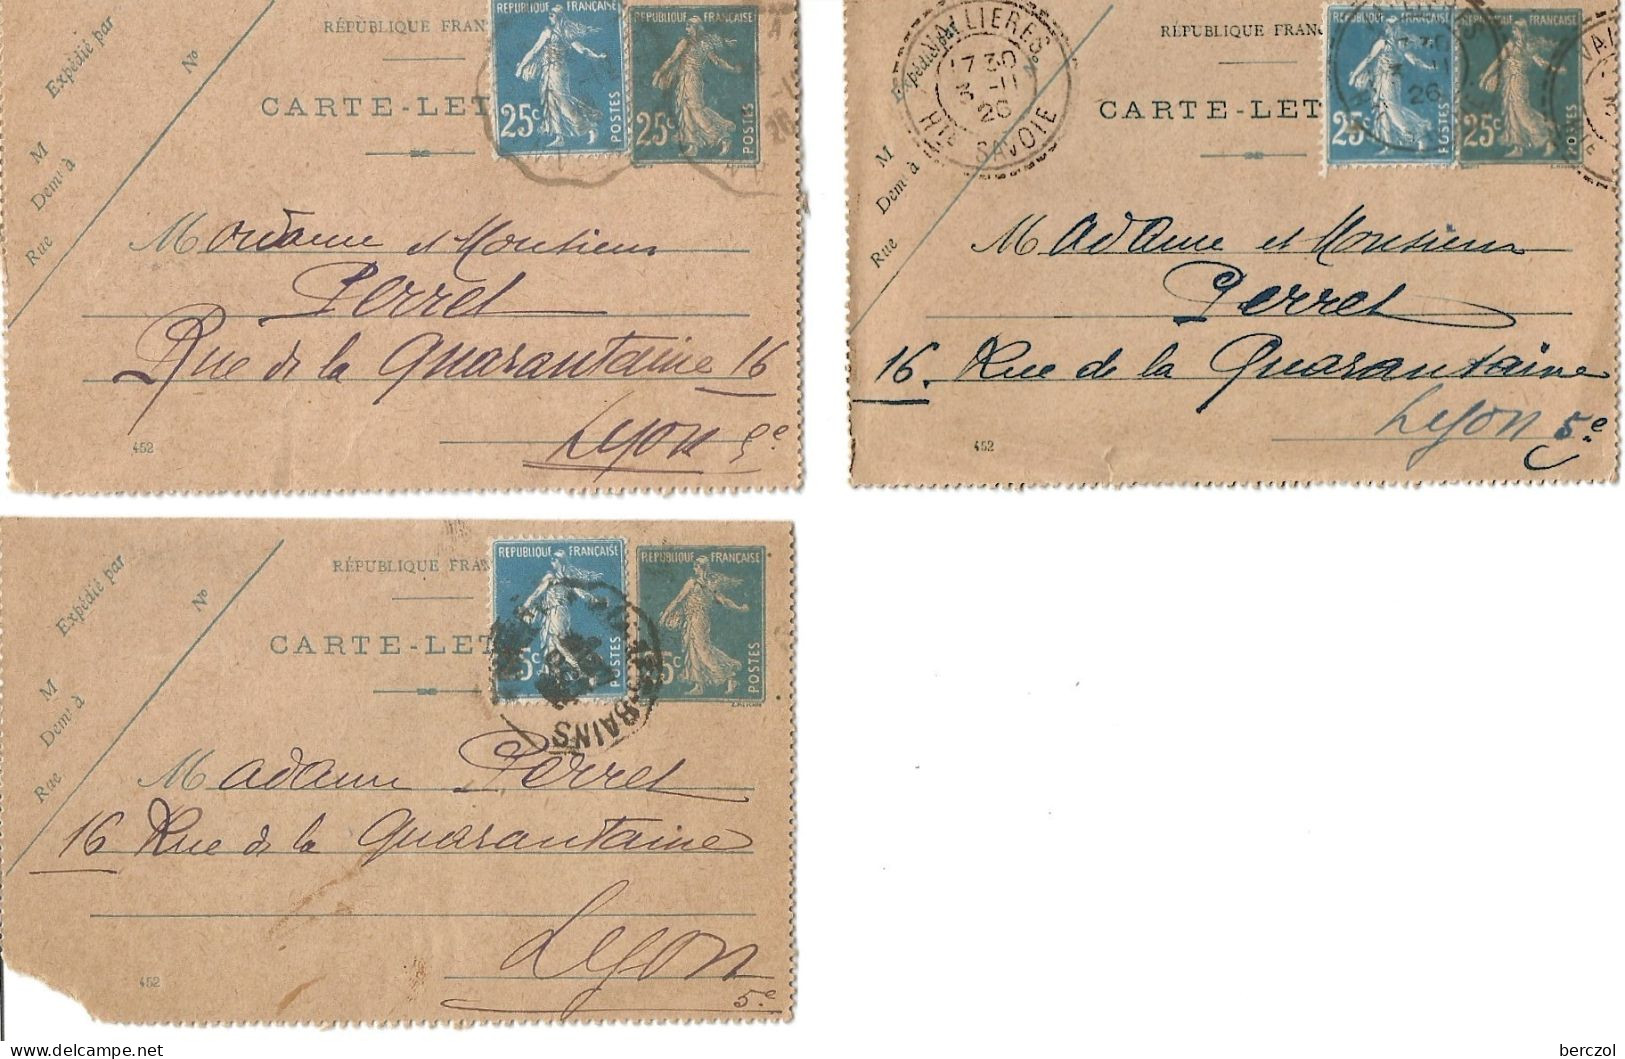 FRANCE ANNEE1907/1939 LOT DE 3 ENTIERS TYPE SEMEUSE CAMEE N° 140 CL1  TB DATE : 452  - Cartes-lettres